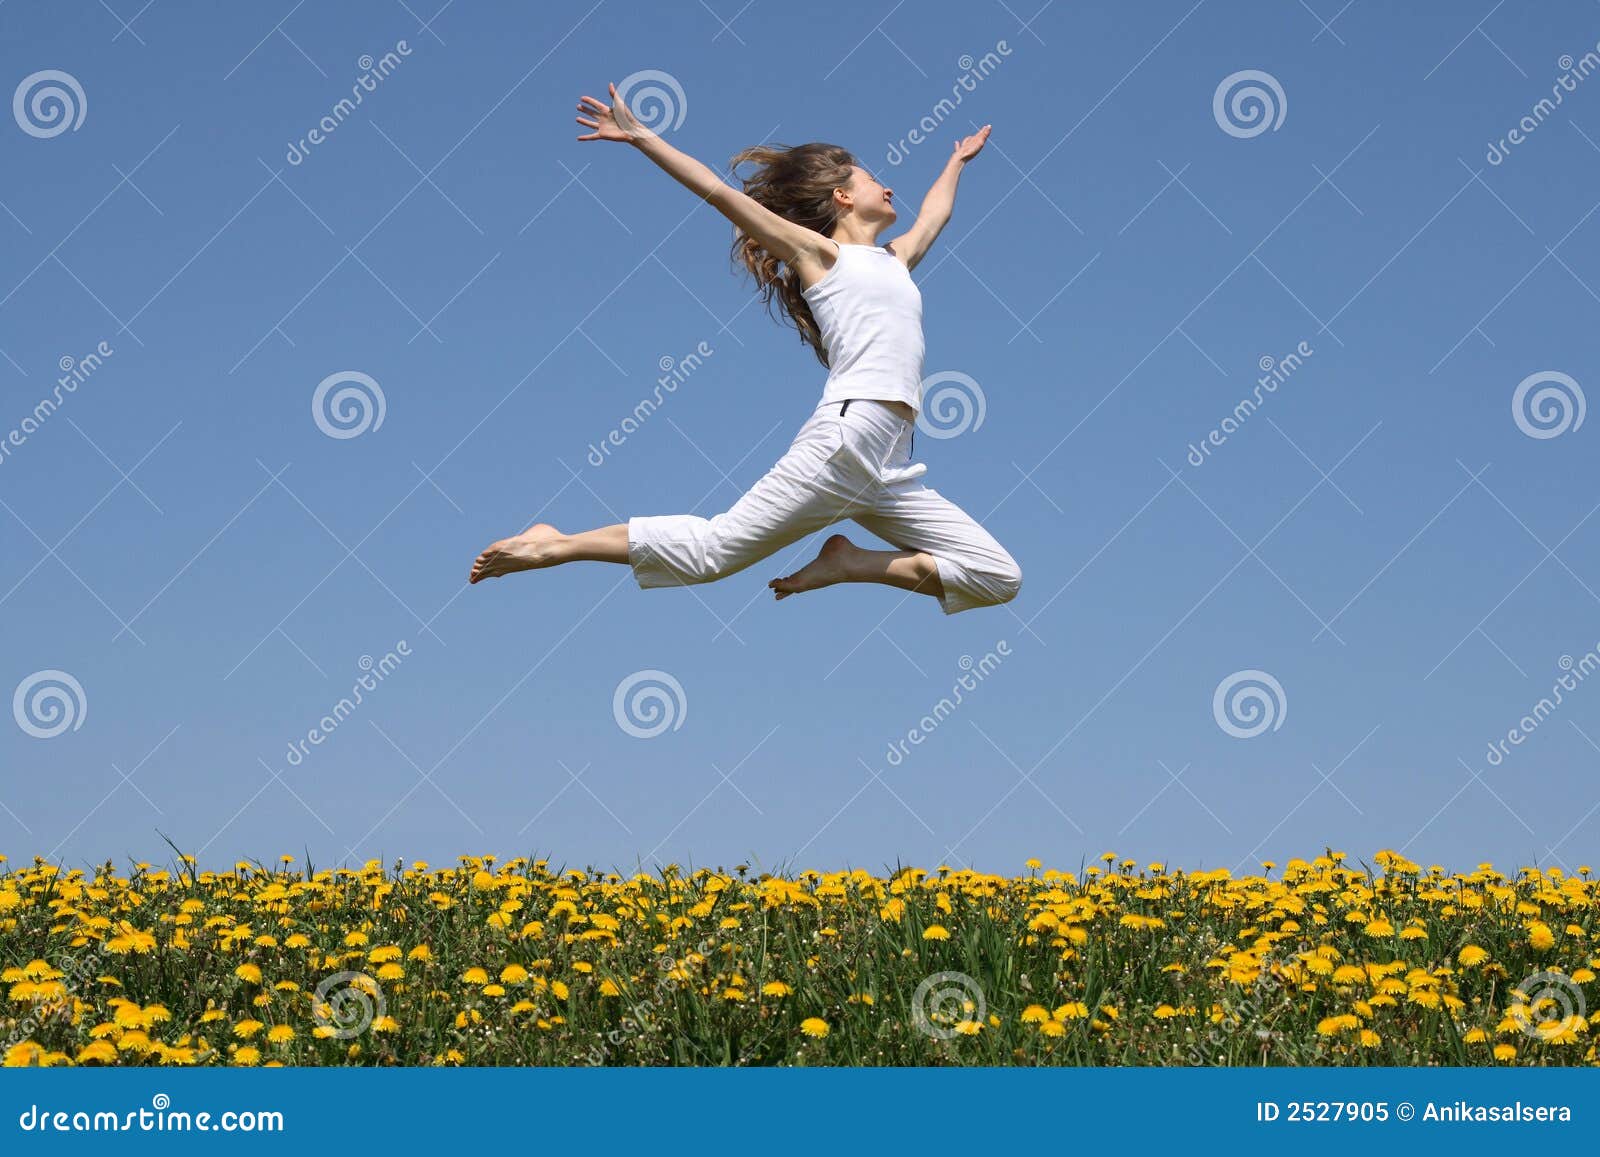 girl flying in a jump